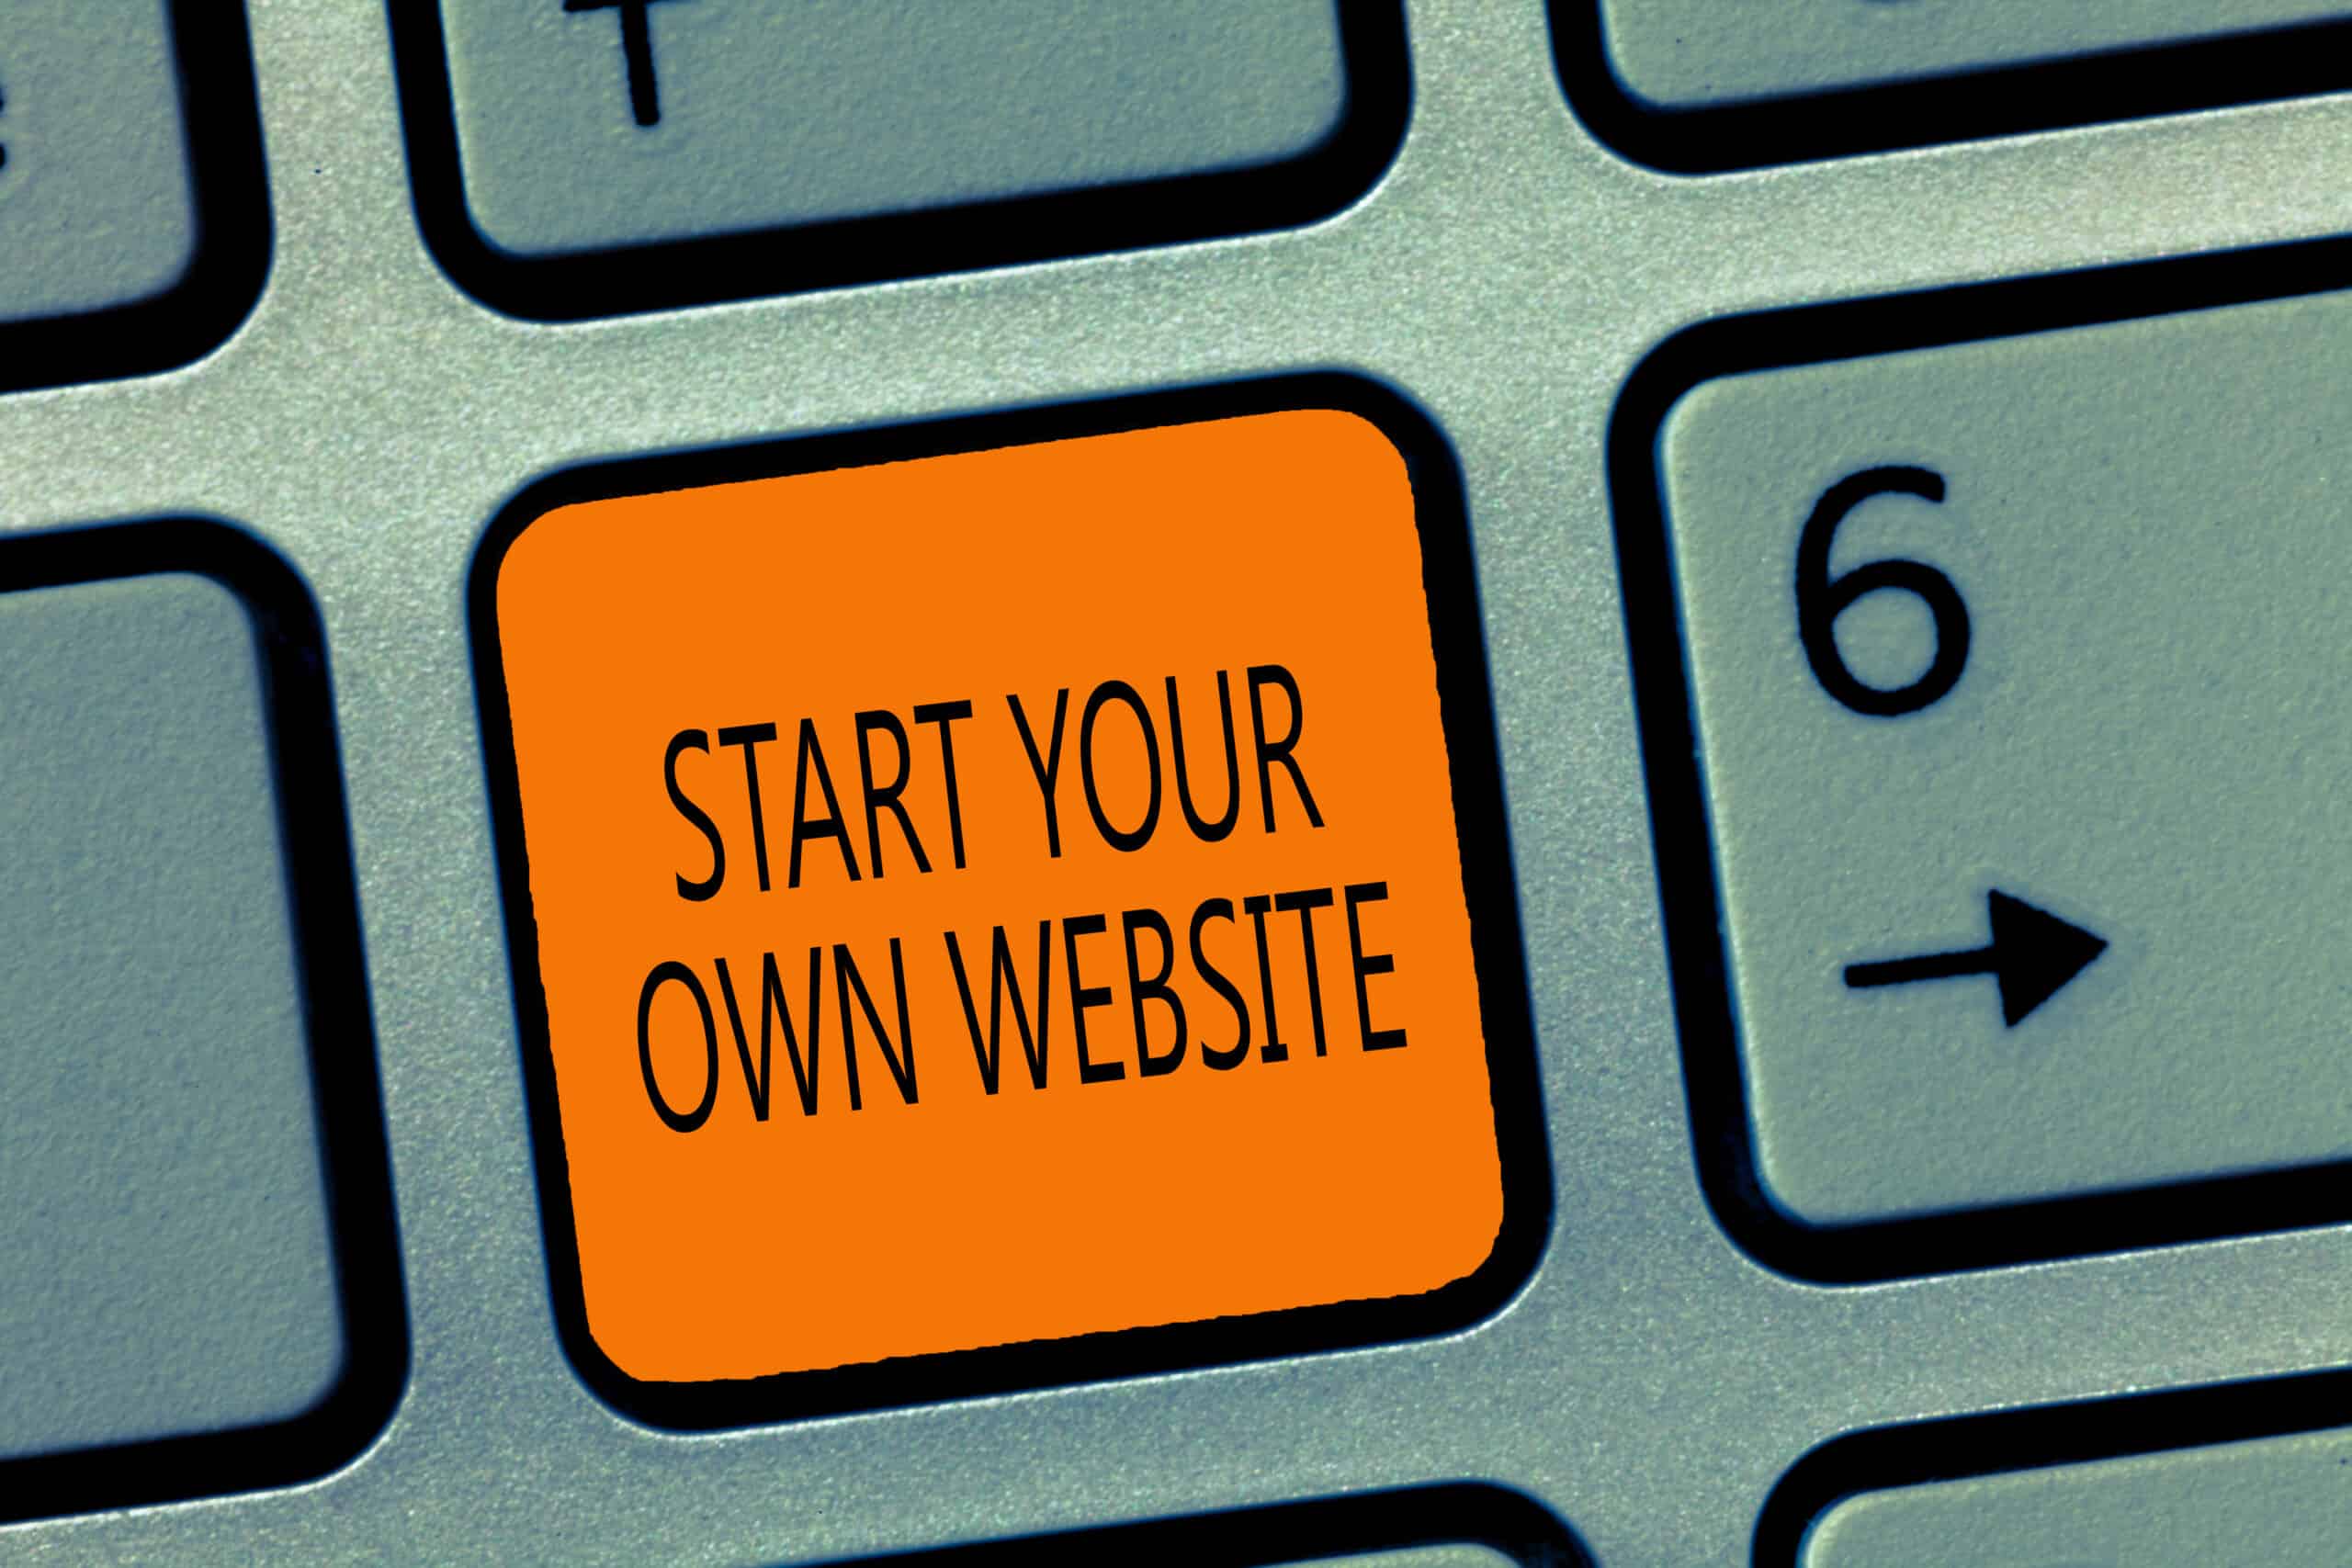 note saying "start your own website" - using WordPress to build a website